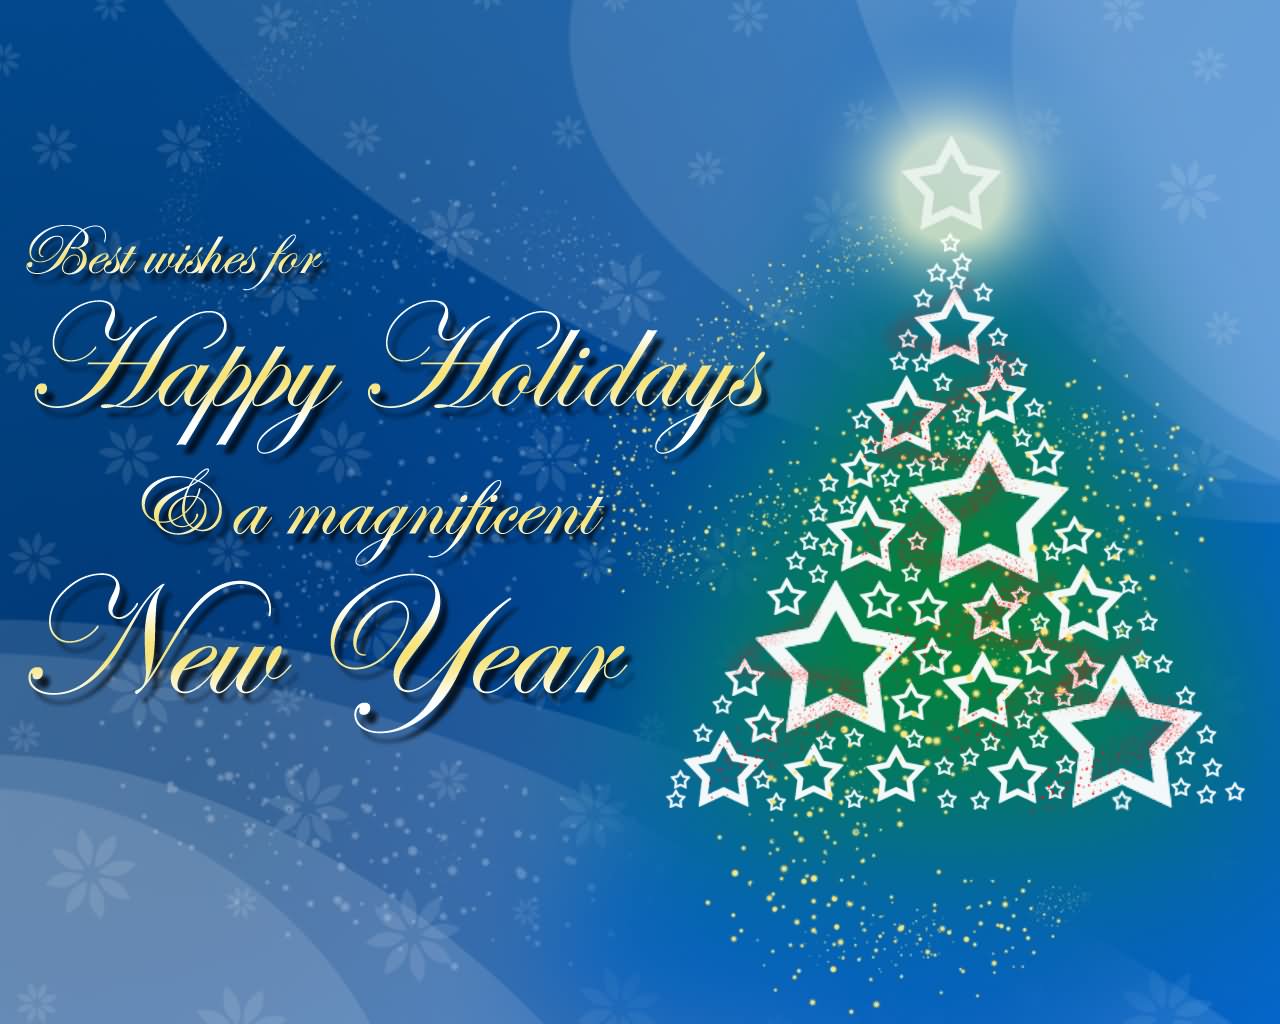 best wishes for happy holidays & a magnificent new year